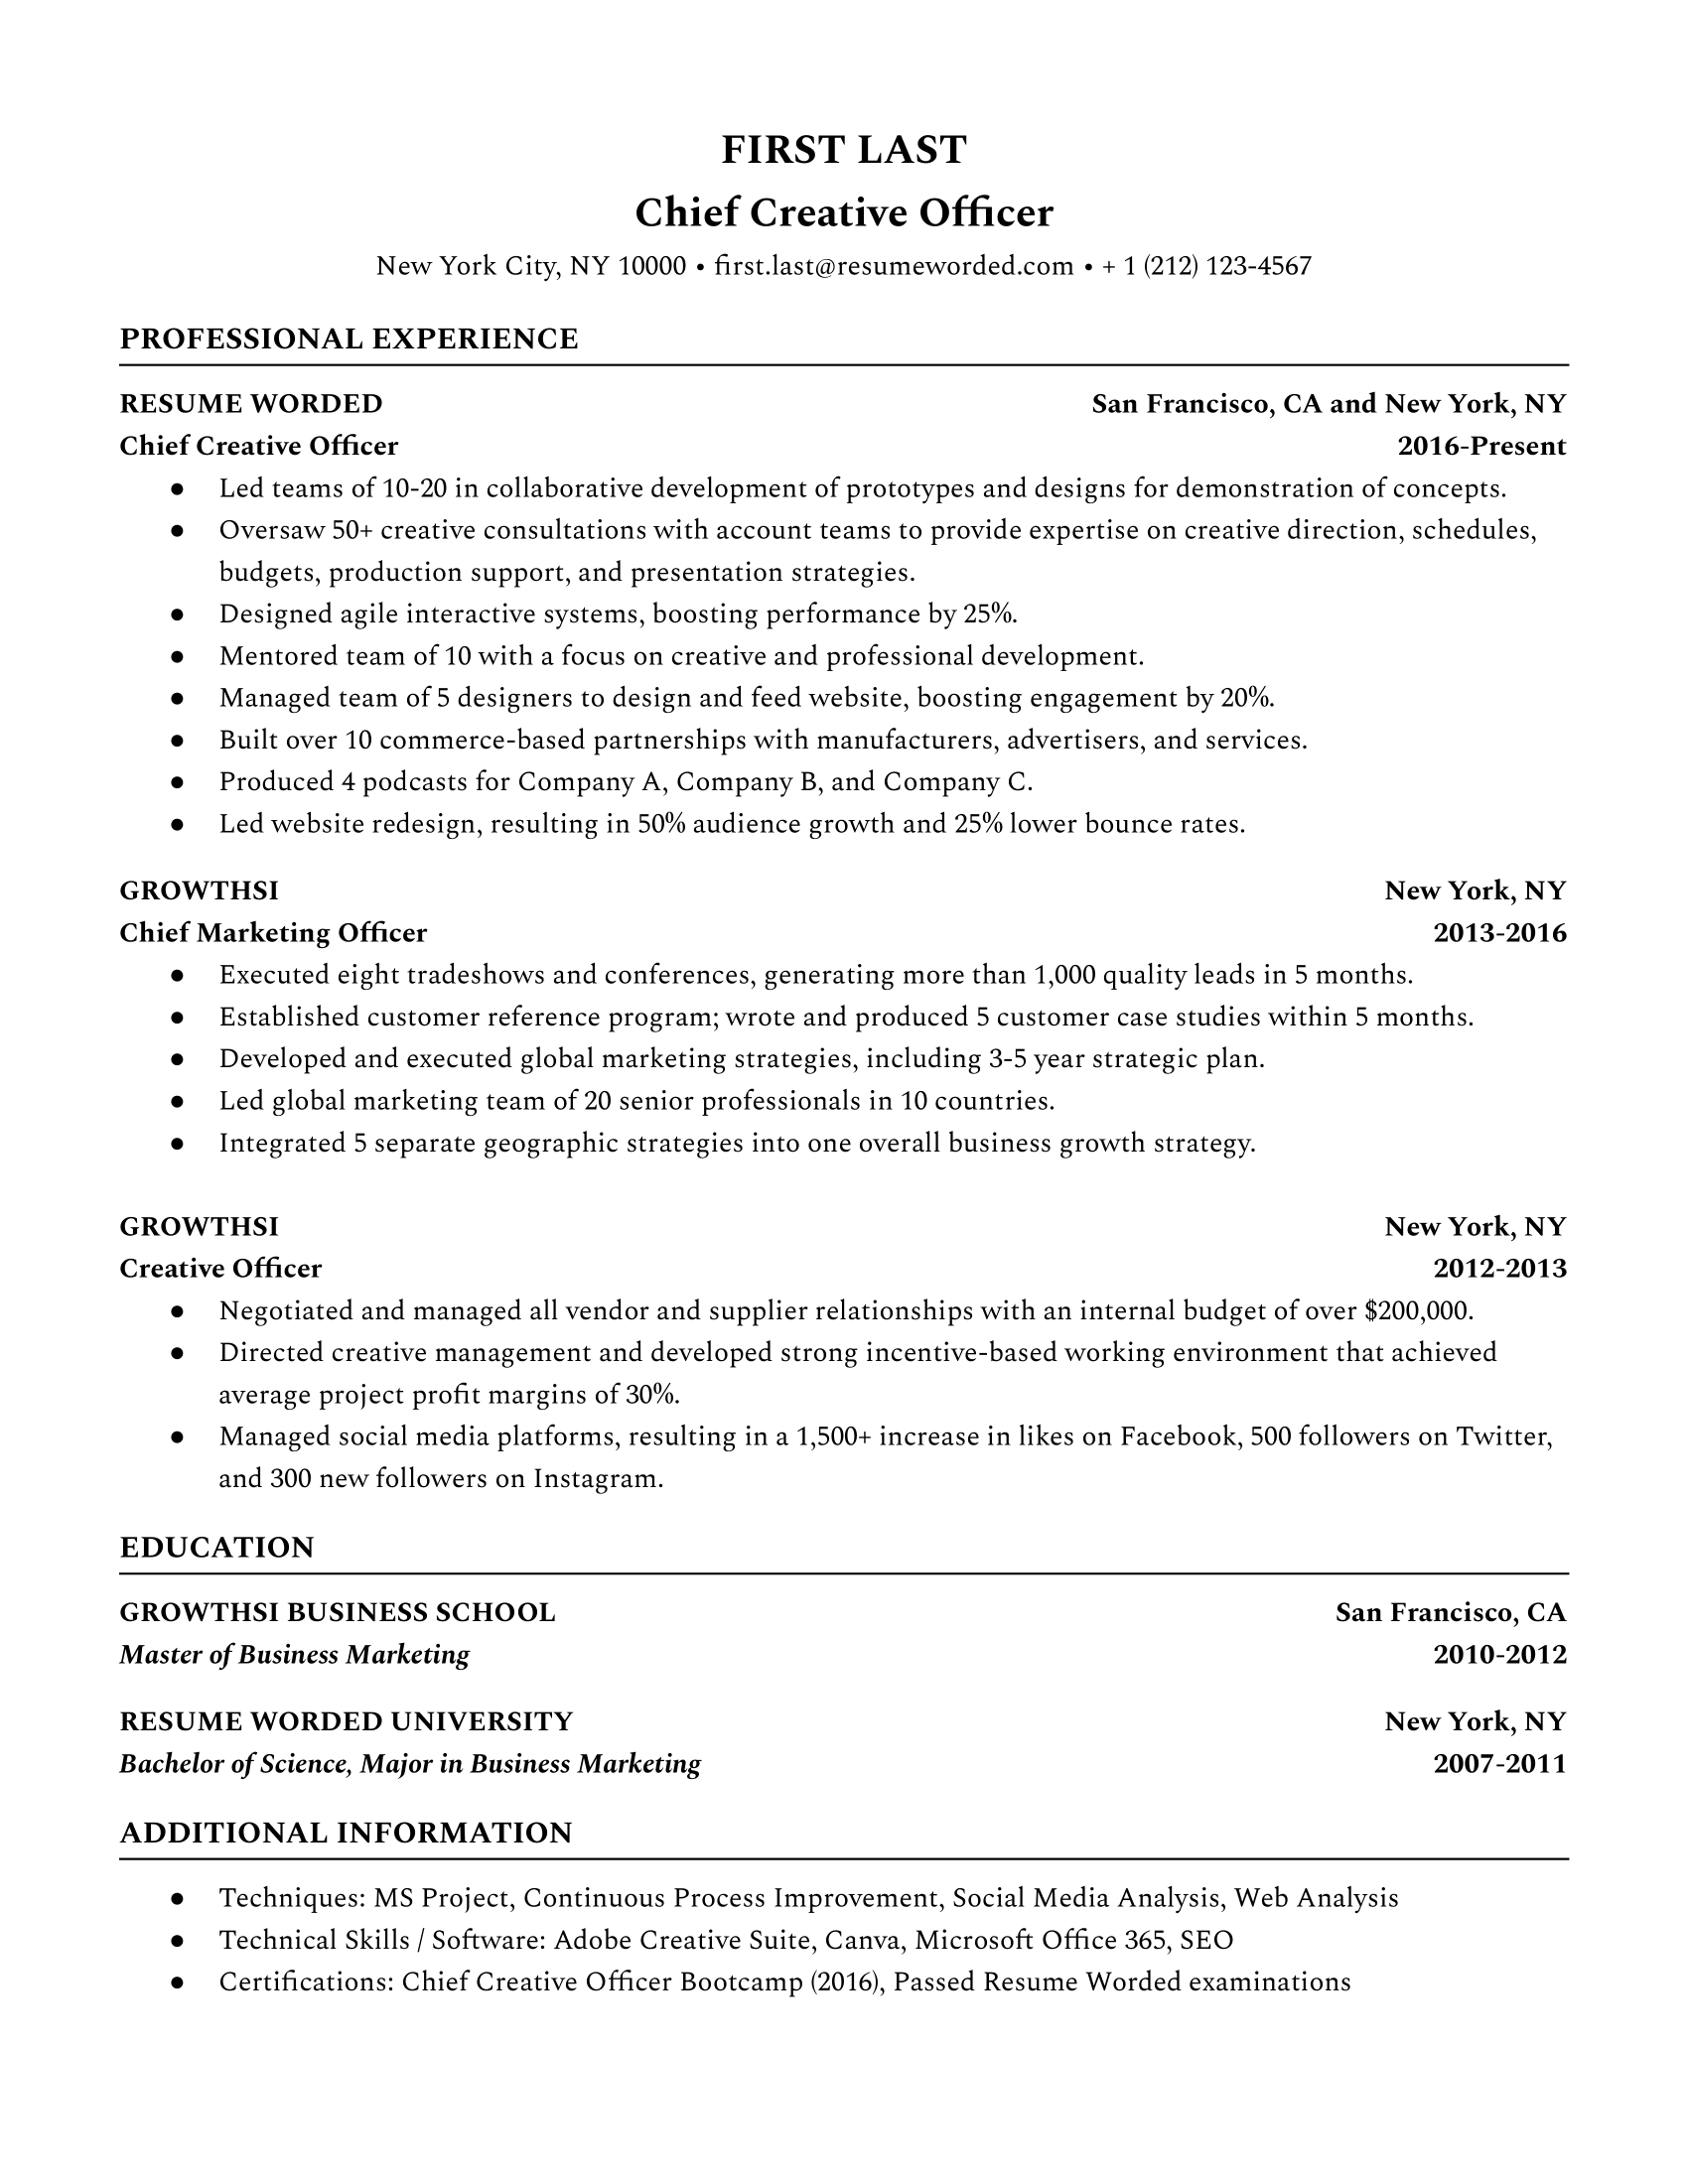 Chief Creative Officer Resume Sample